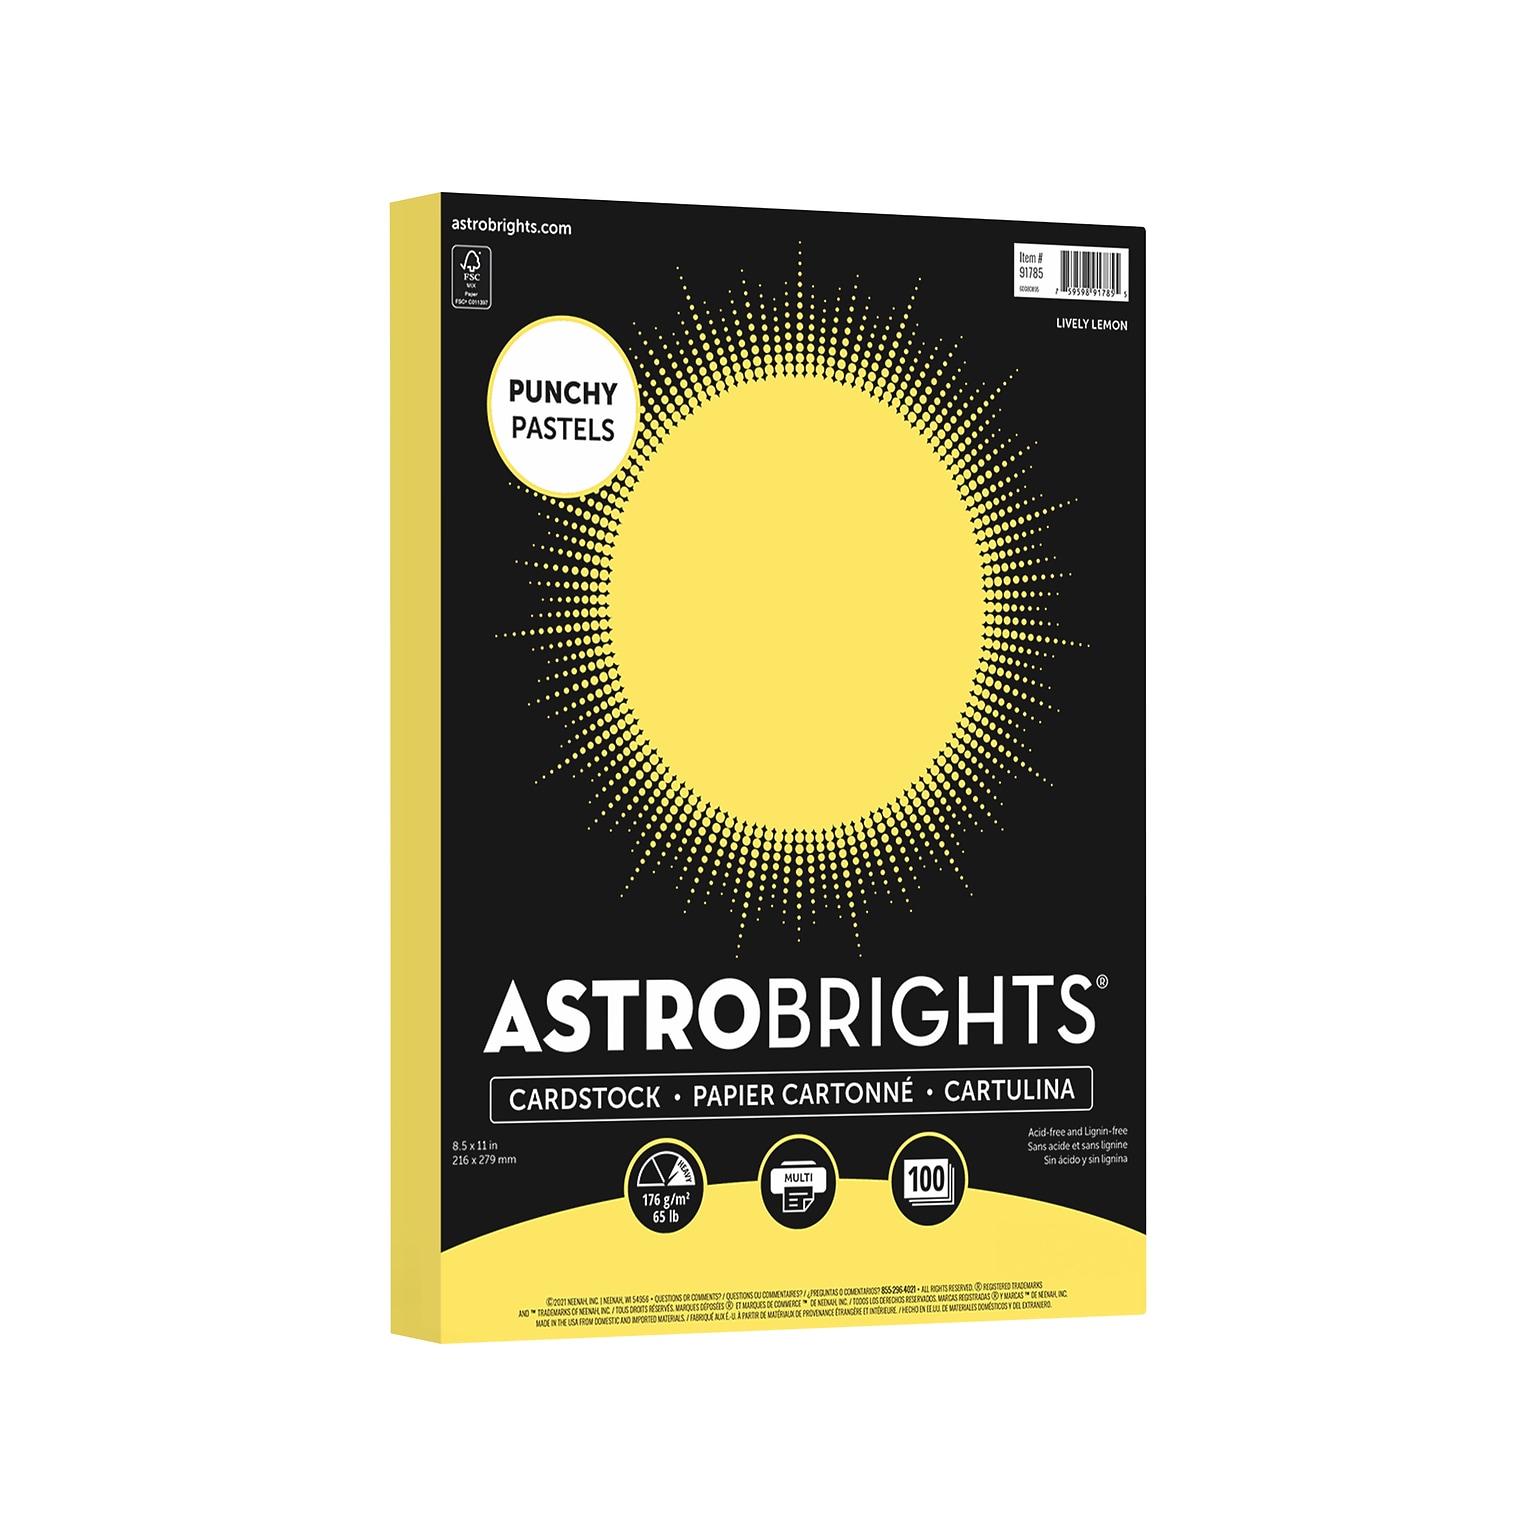 Astrobrights Punchy Pastels 8.5 x 11 Colored Paper, 65 lbs., Lively Lemon, 100 Sheets/Pack (91785)